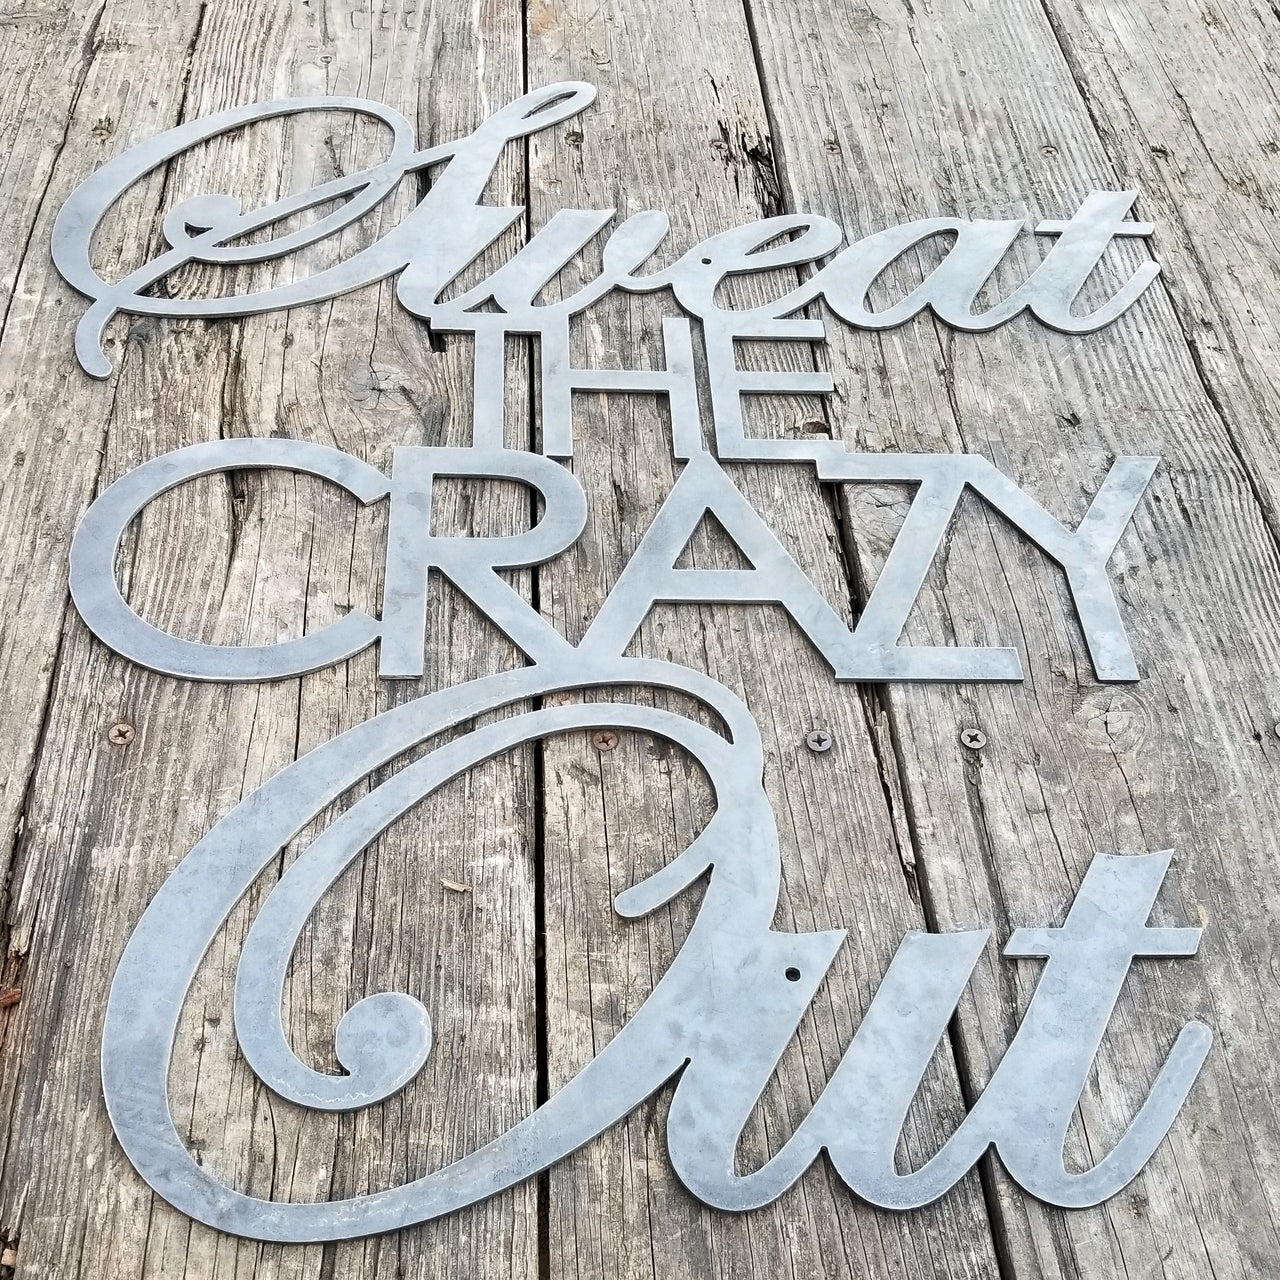 Sweat the Crazy Out -  Home Gym Sign - Yoga, Work Out, Exercise Wall Art - Free Shipping